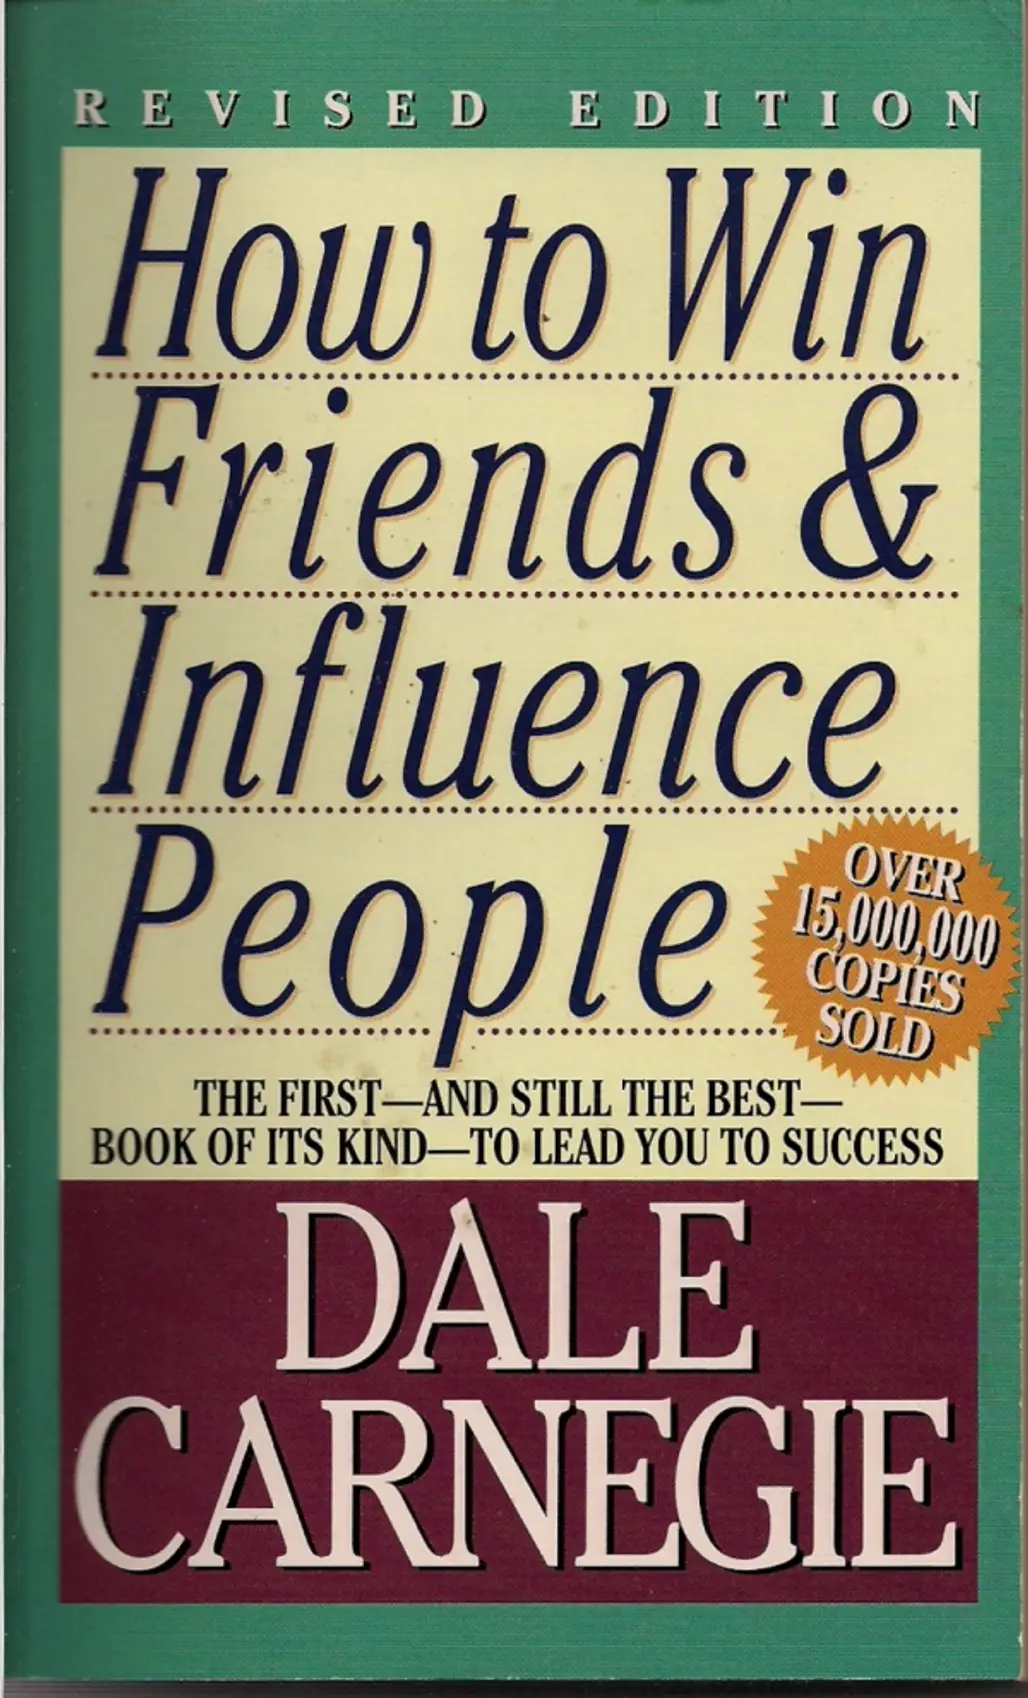 Dale Carnegie – How to Win Friends and Influence People